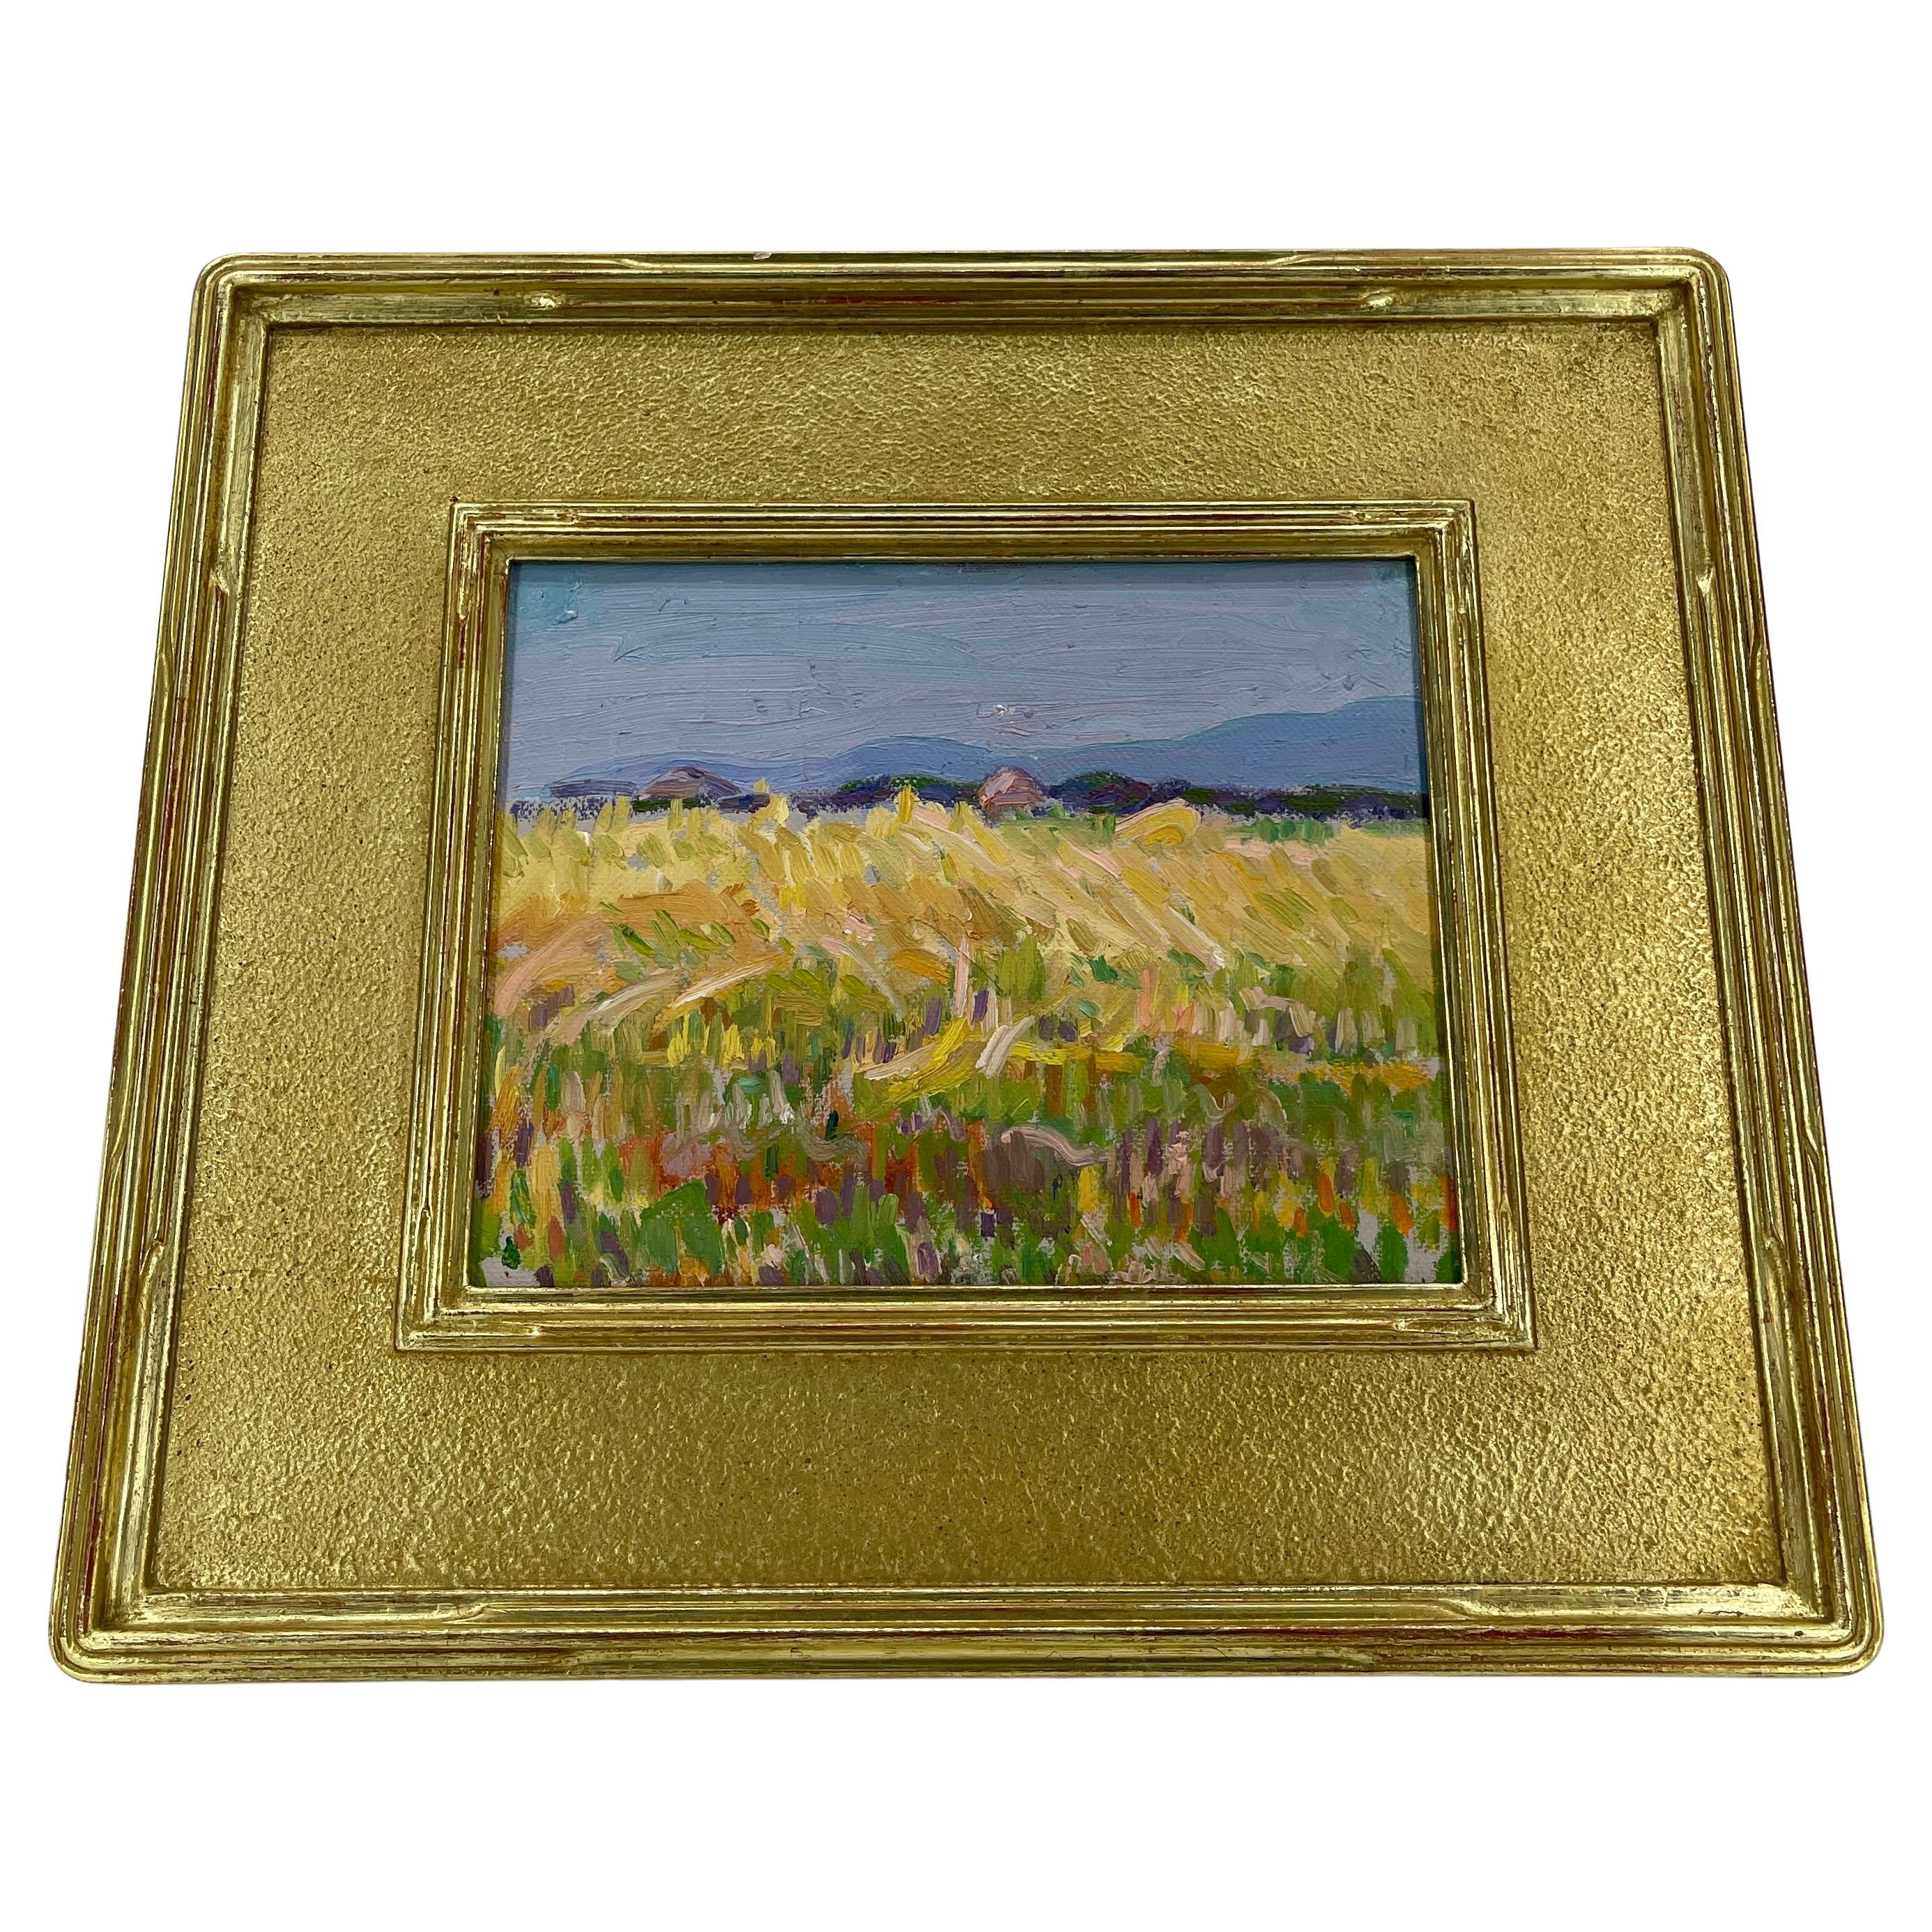 Countryside Landscape Oil Painting on Canvas of a Field with Haystacks, France 1930's

Oil painting on canvas from the estate of Richard Horace Bassett (1900 - 1995). The artist studied and painted in Europe during the 1920s and 1930s, and the